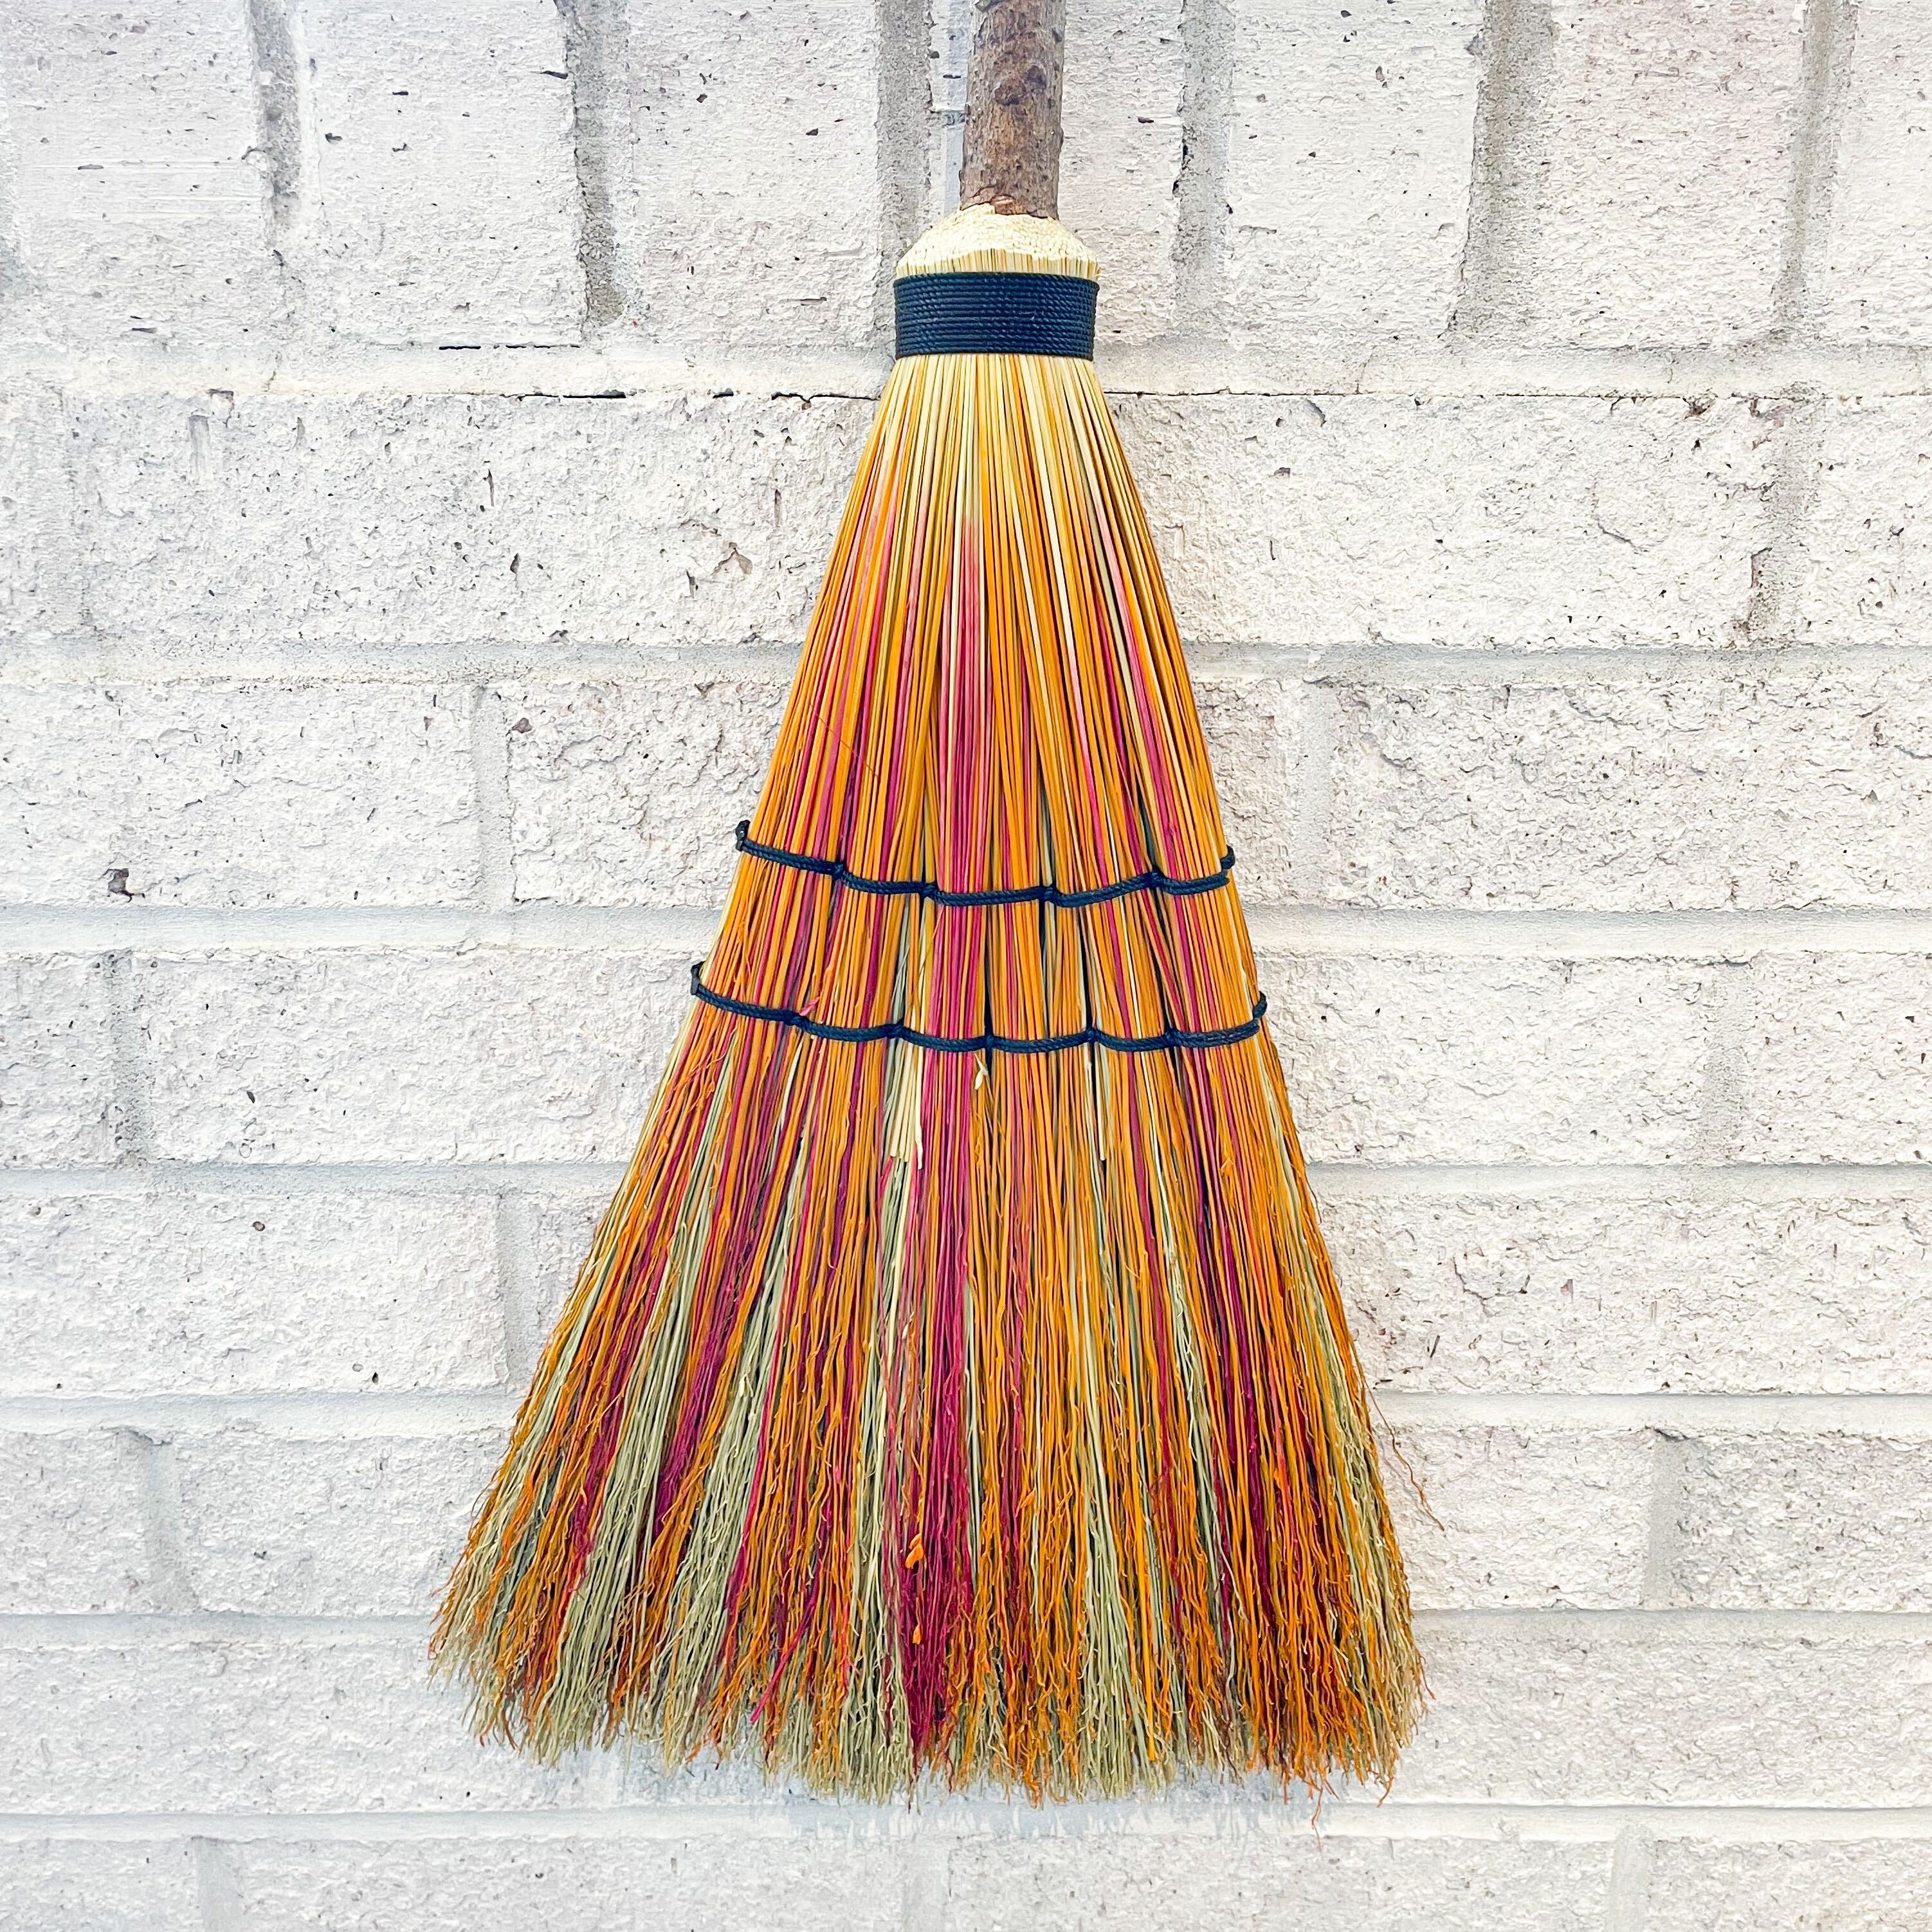 "Light as a Feather" Two-Tone Sweeper Brooms